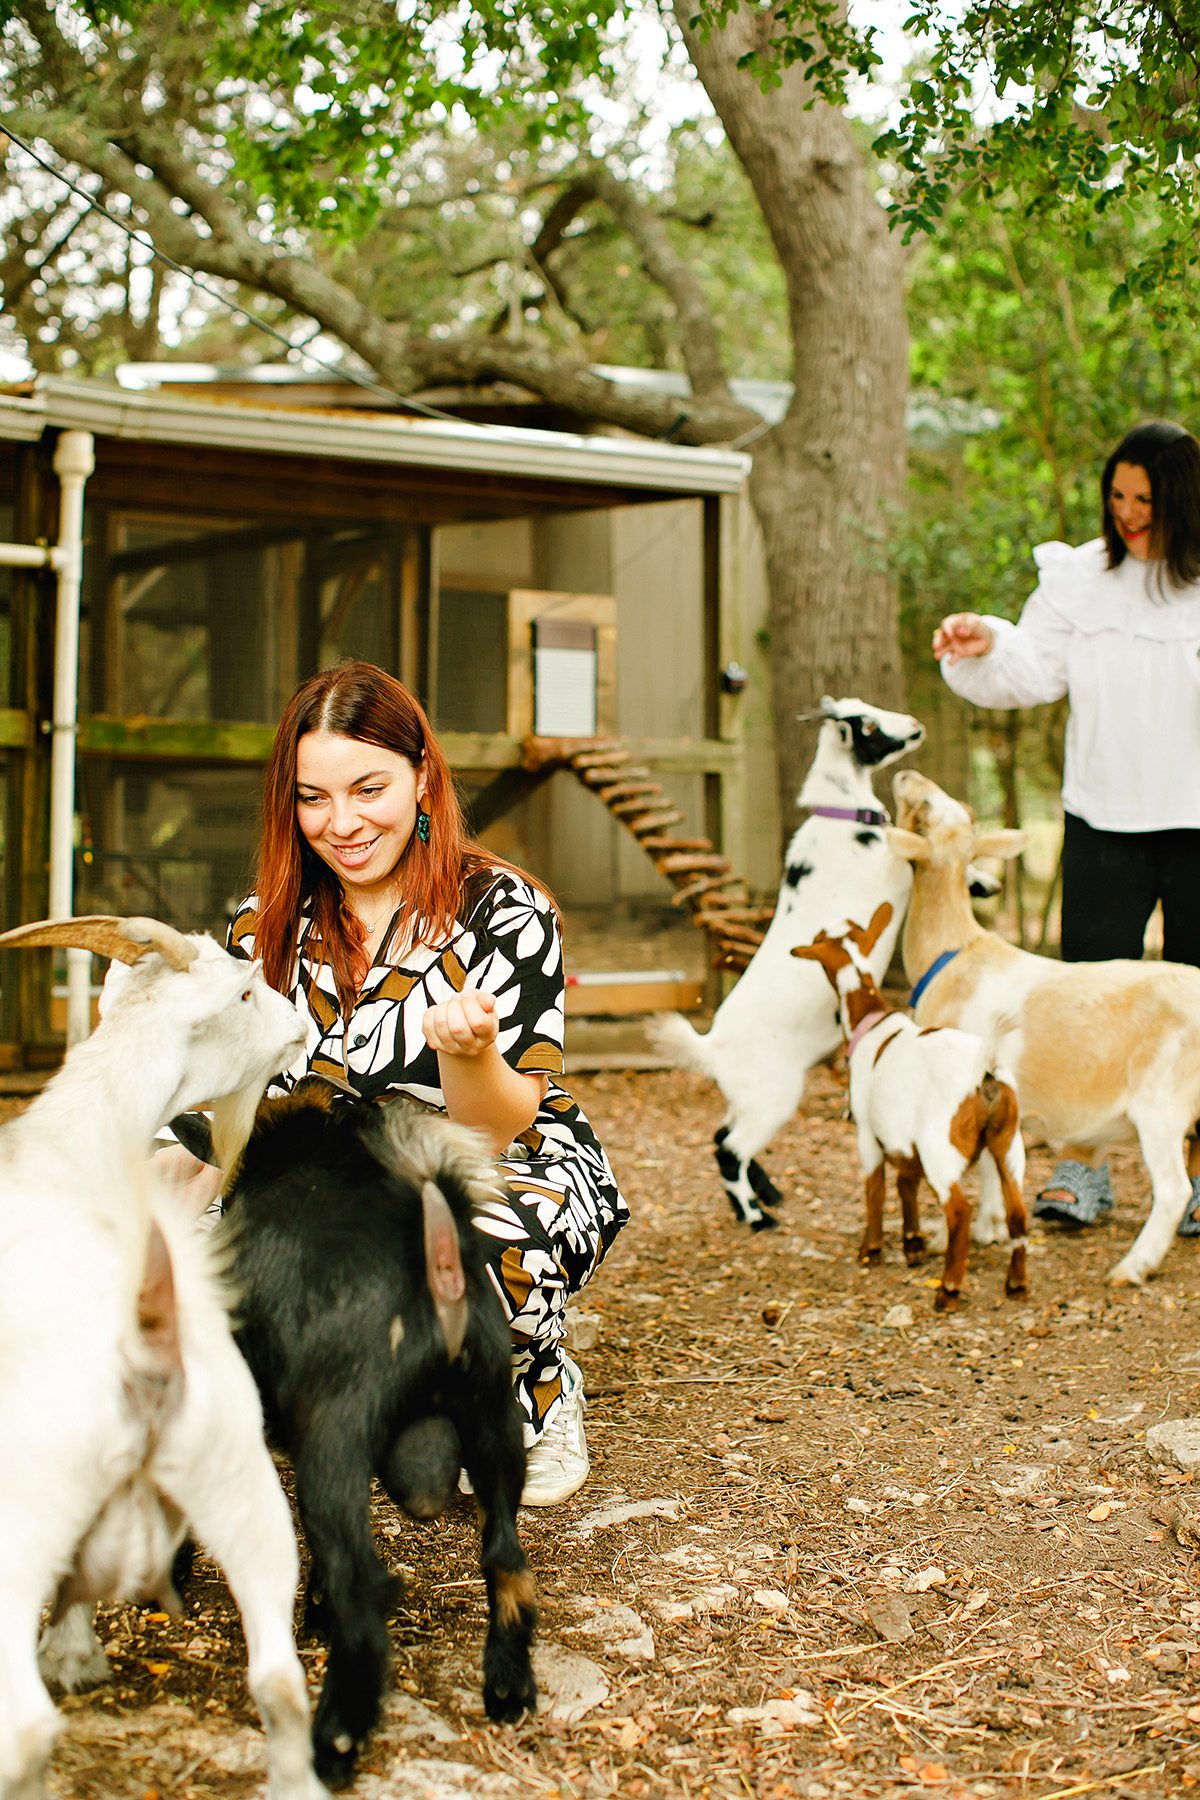 Natalie Blanco and her Norwegian Pygmy goats at Eco Ranch airbnb